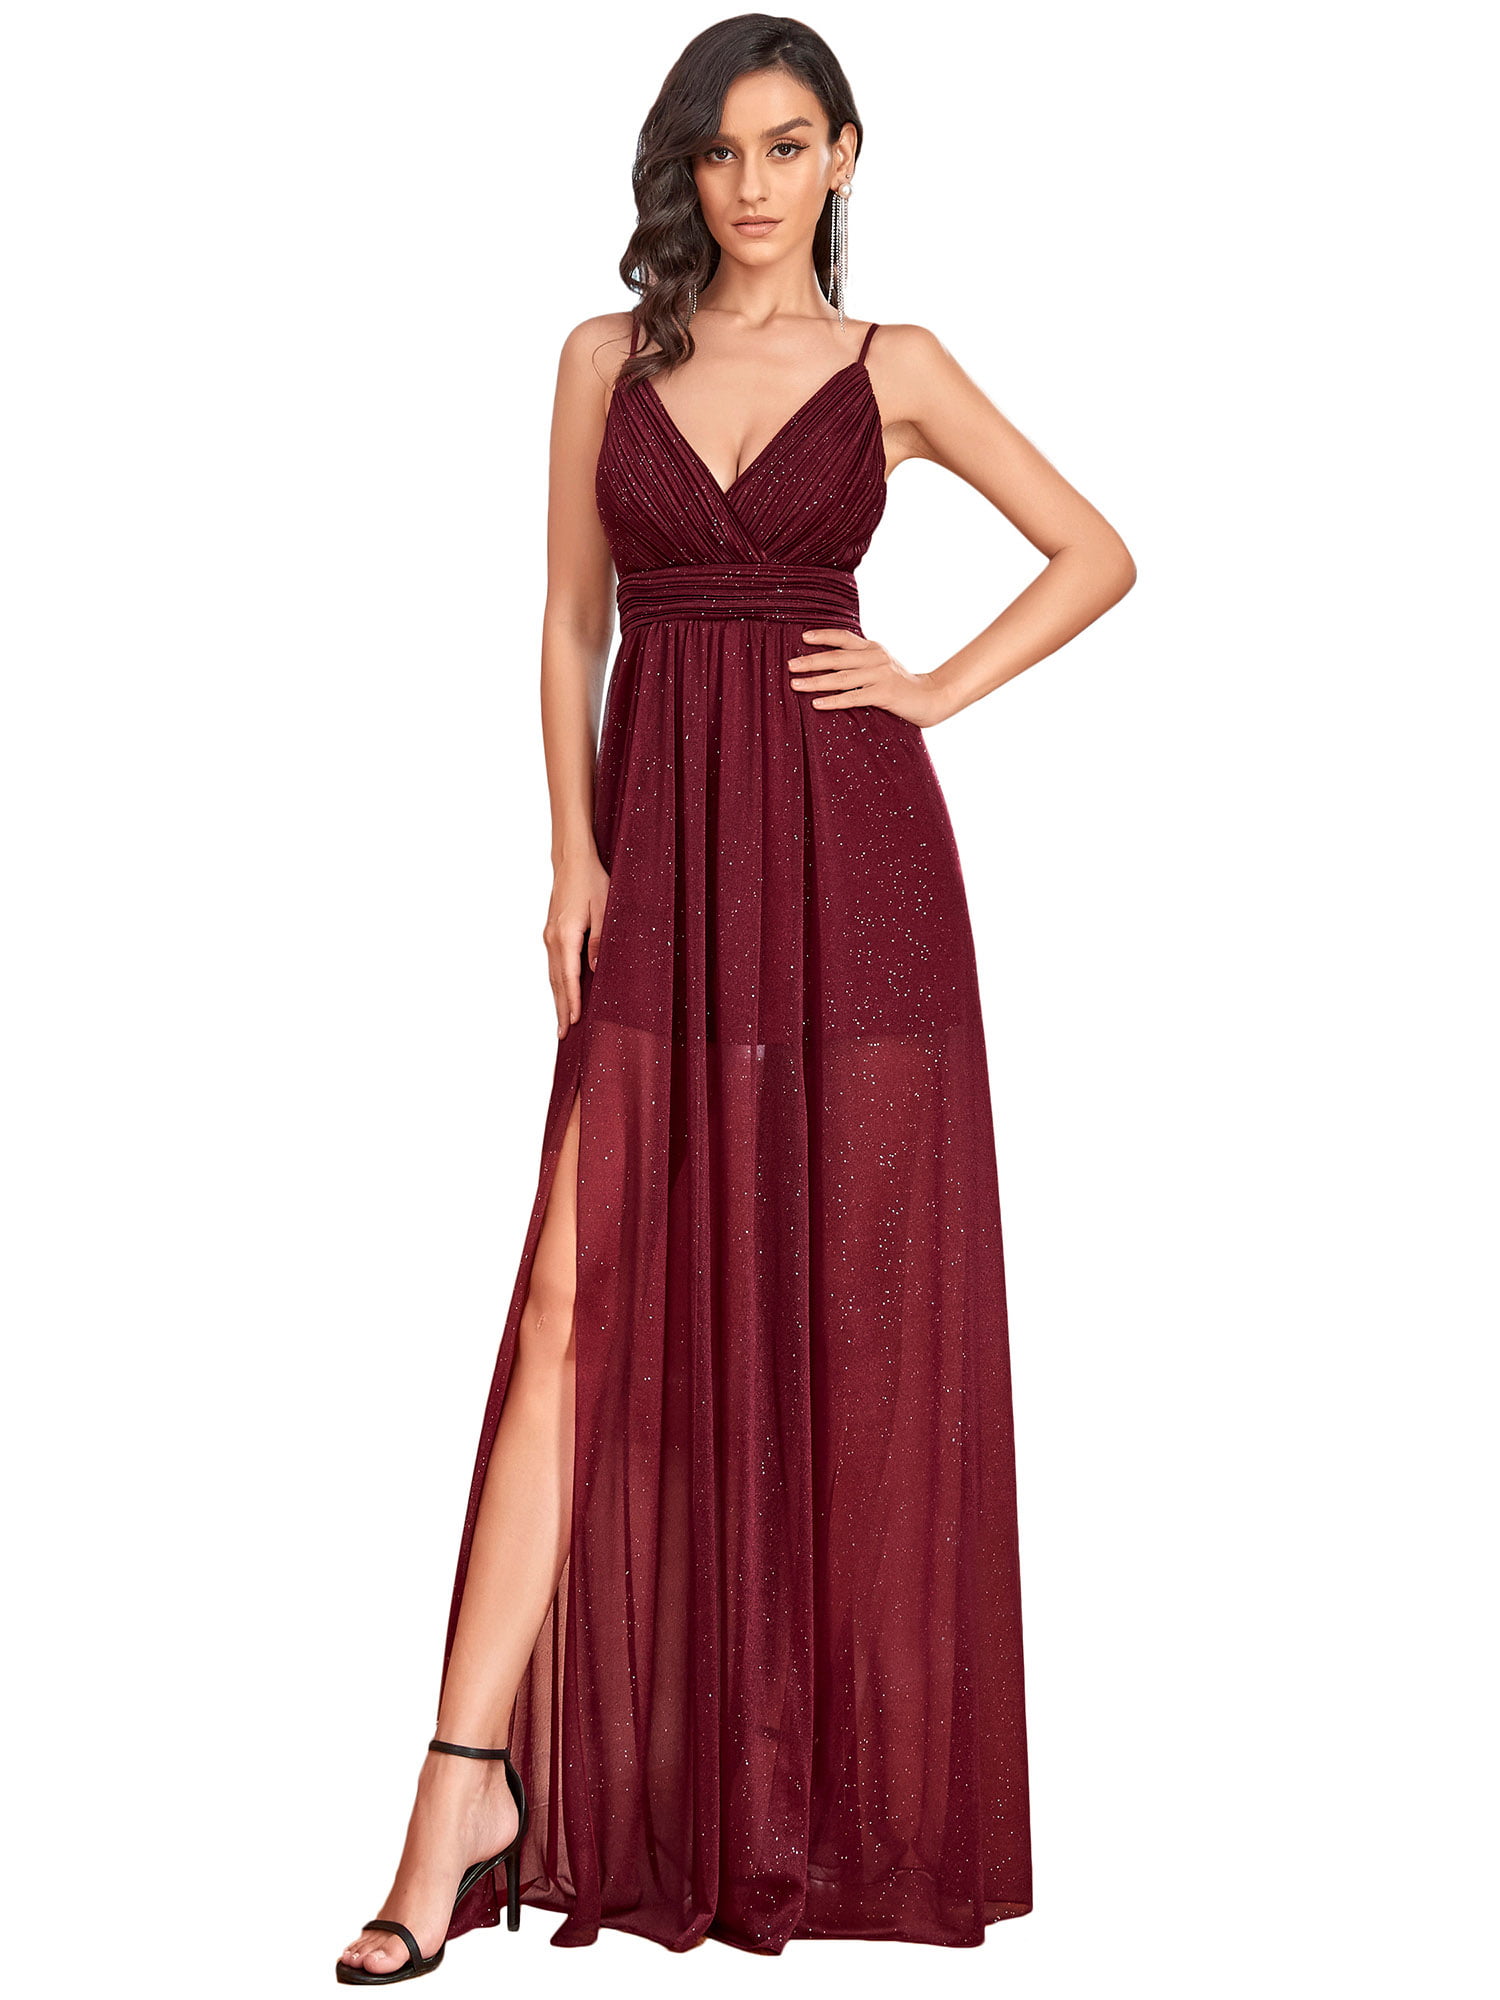 Women Formal Maxi Dress Party Eveing Sleeveless Pleated Belt Cocktail Dresses